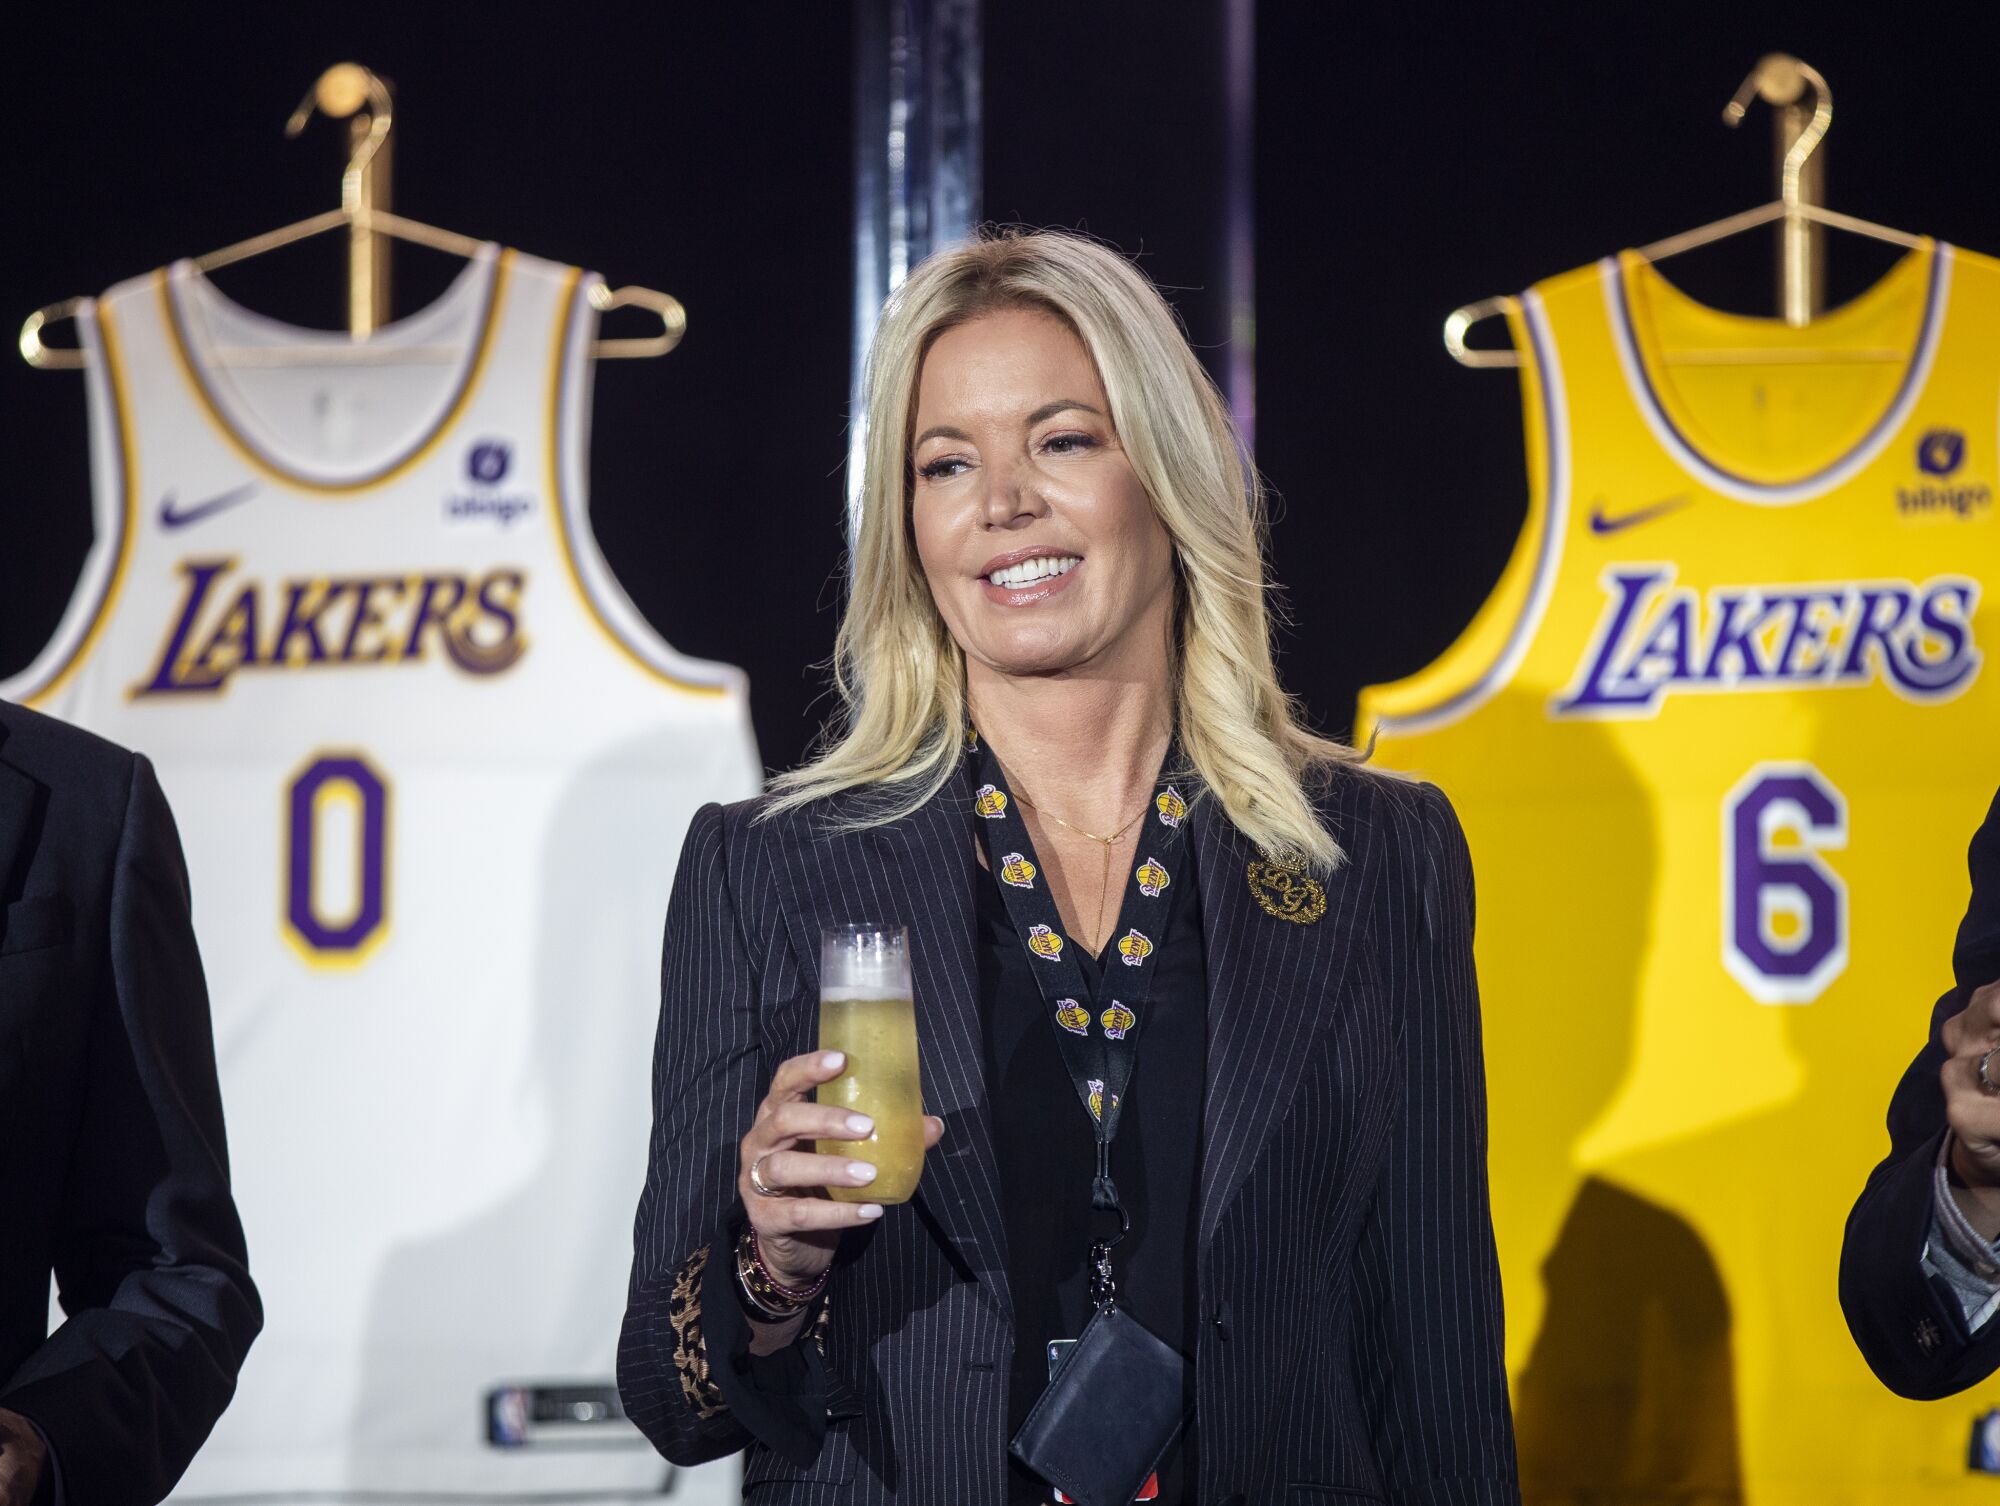 A woman toasts with a stemless flute while standing in front of two Lakers jerseys